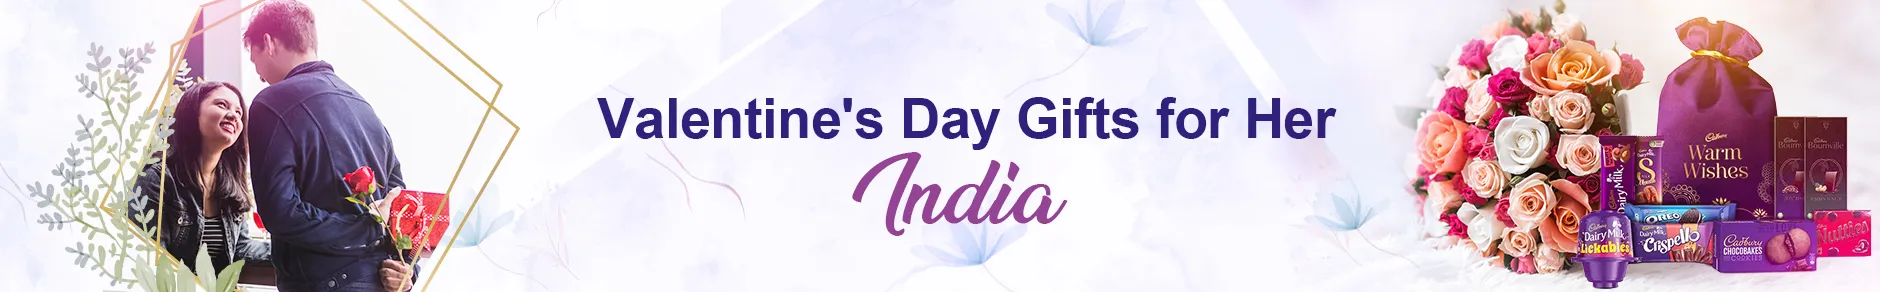 Gifts for Women in Hyderabad | Send Flowers, Cake & Gift Hampers in 2 Hours | Same Day Delivery, Free Shipping